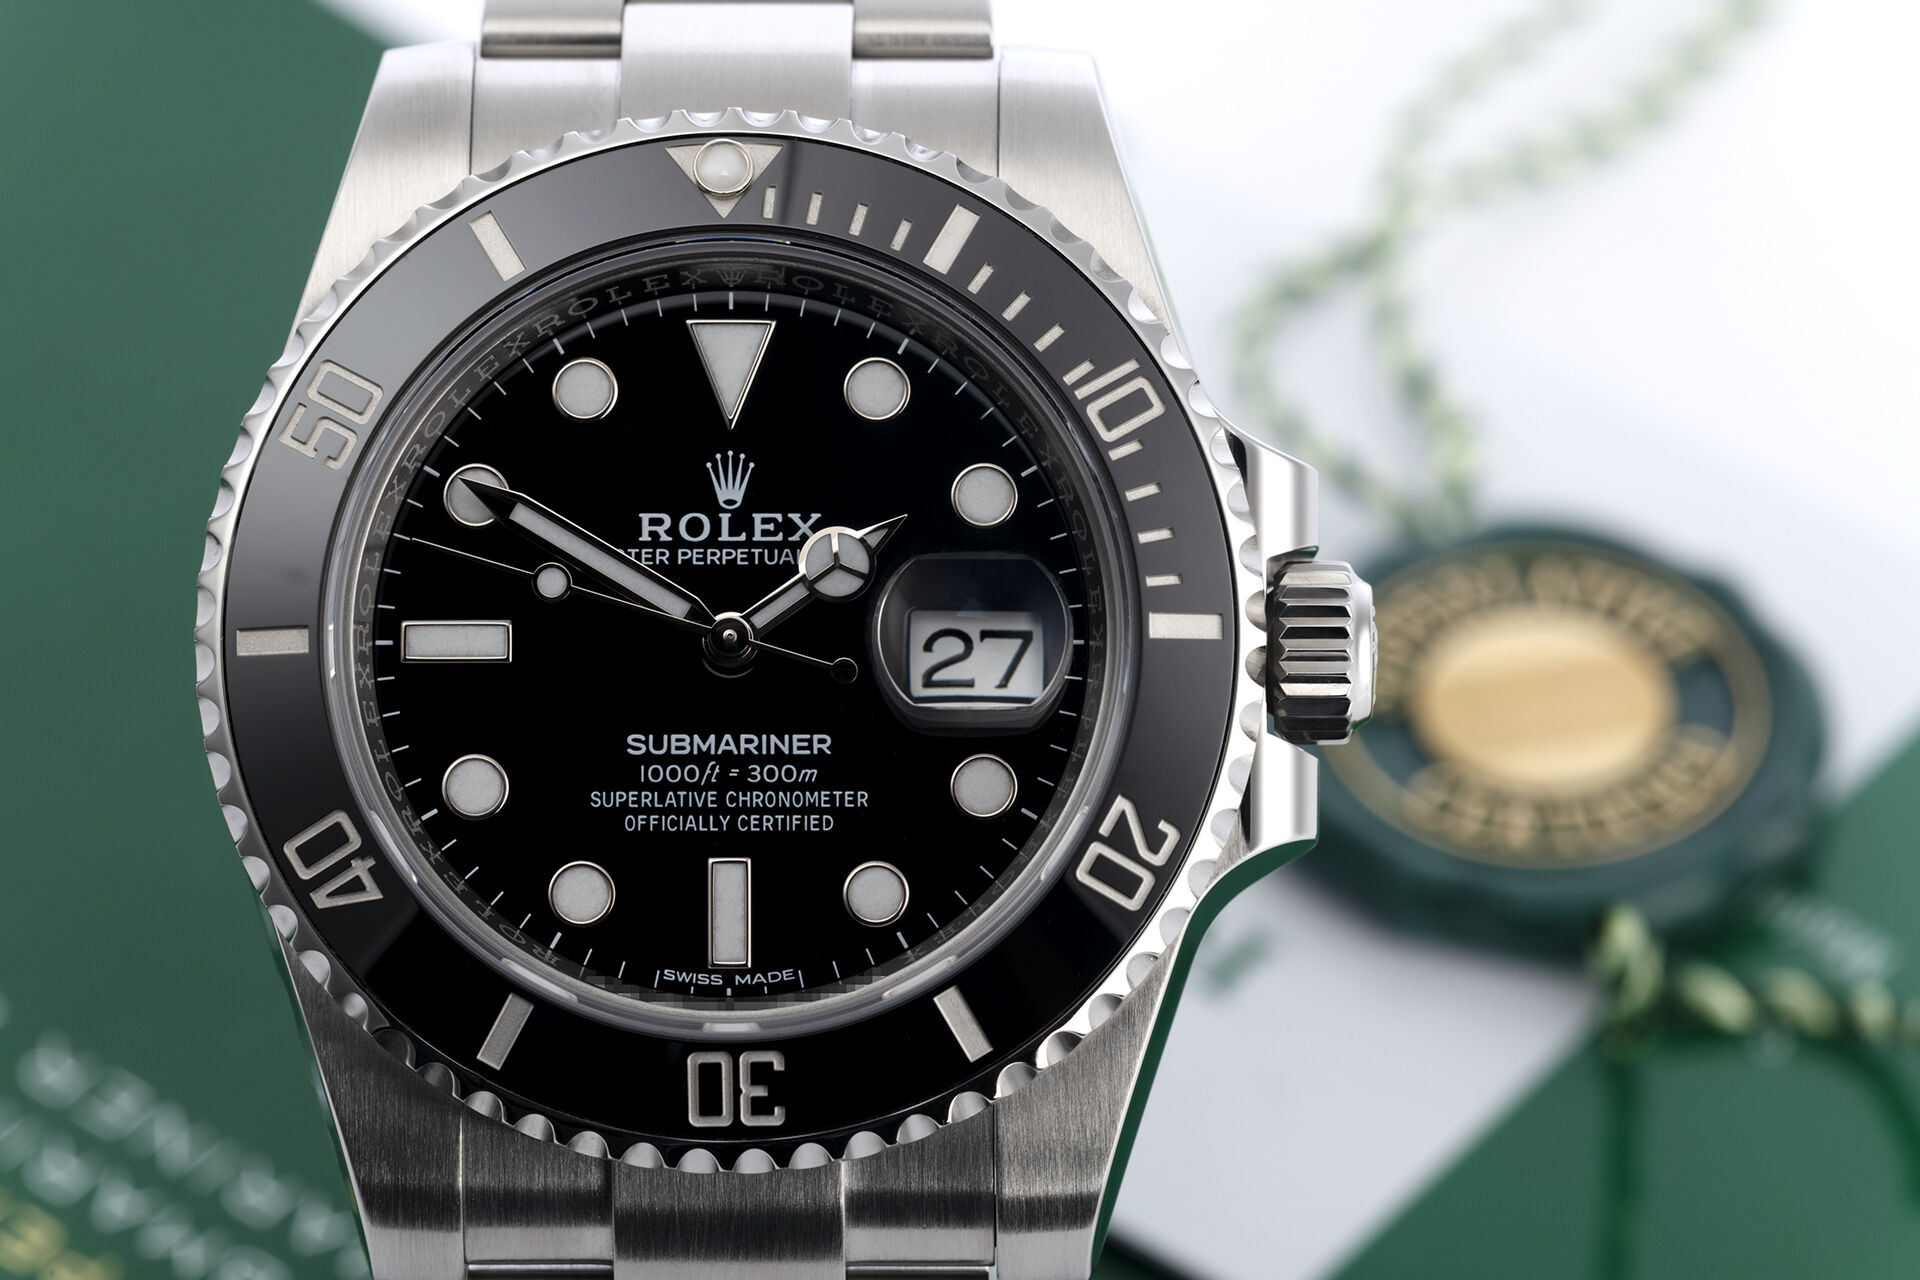 ref 116610LN | Discontinued - UK Purchased | Rolex Submariner Date